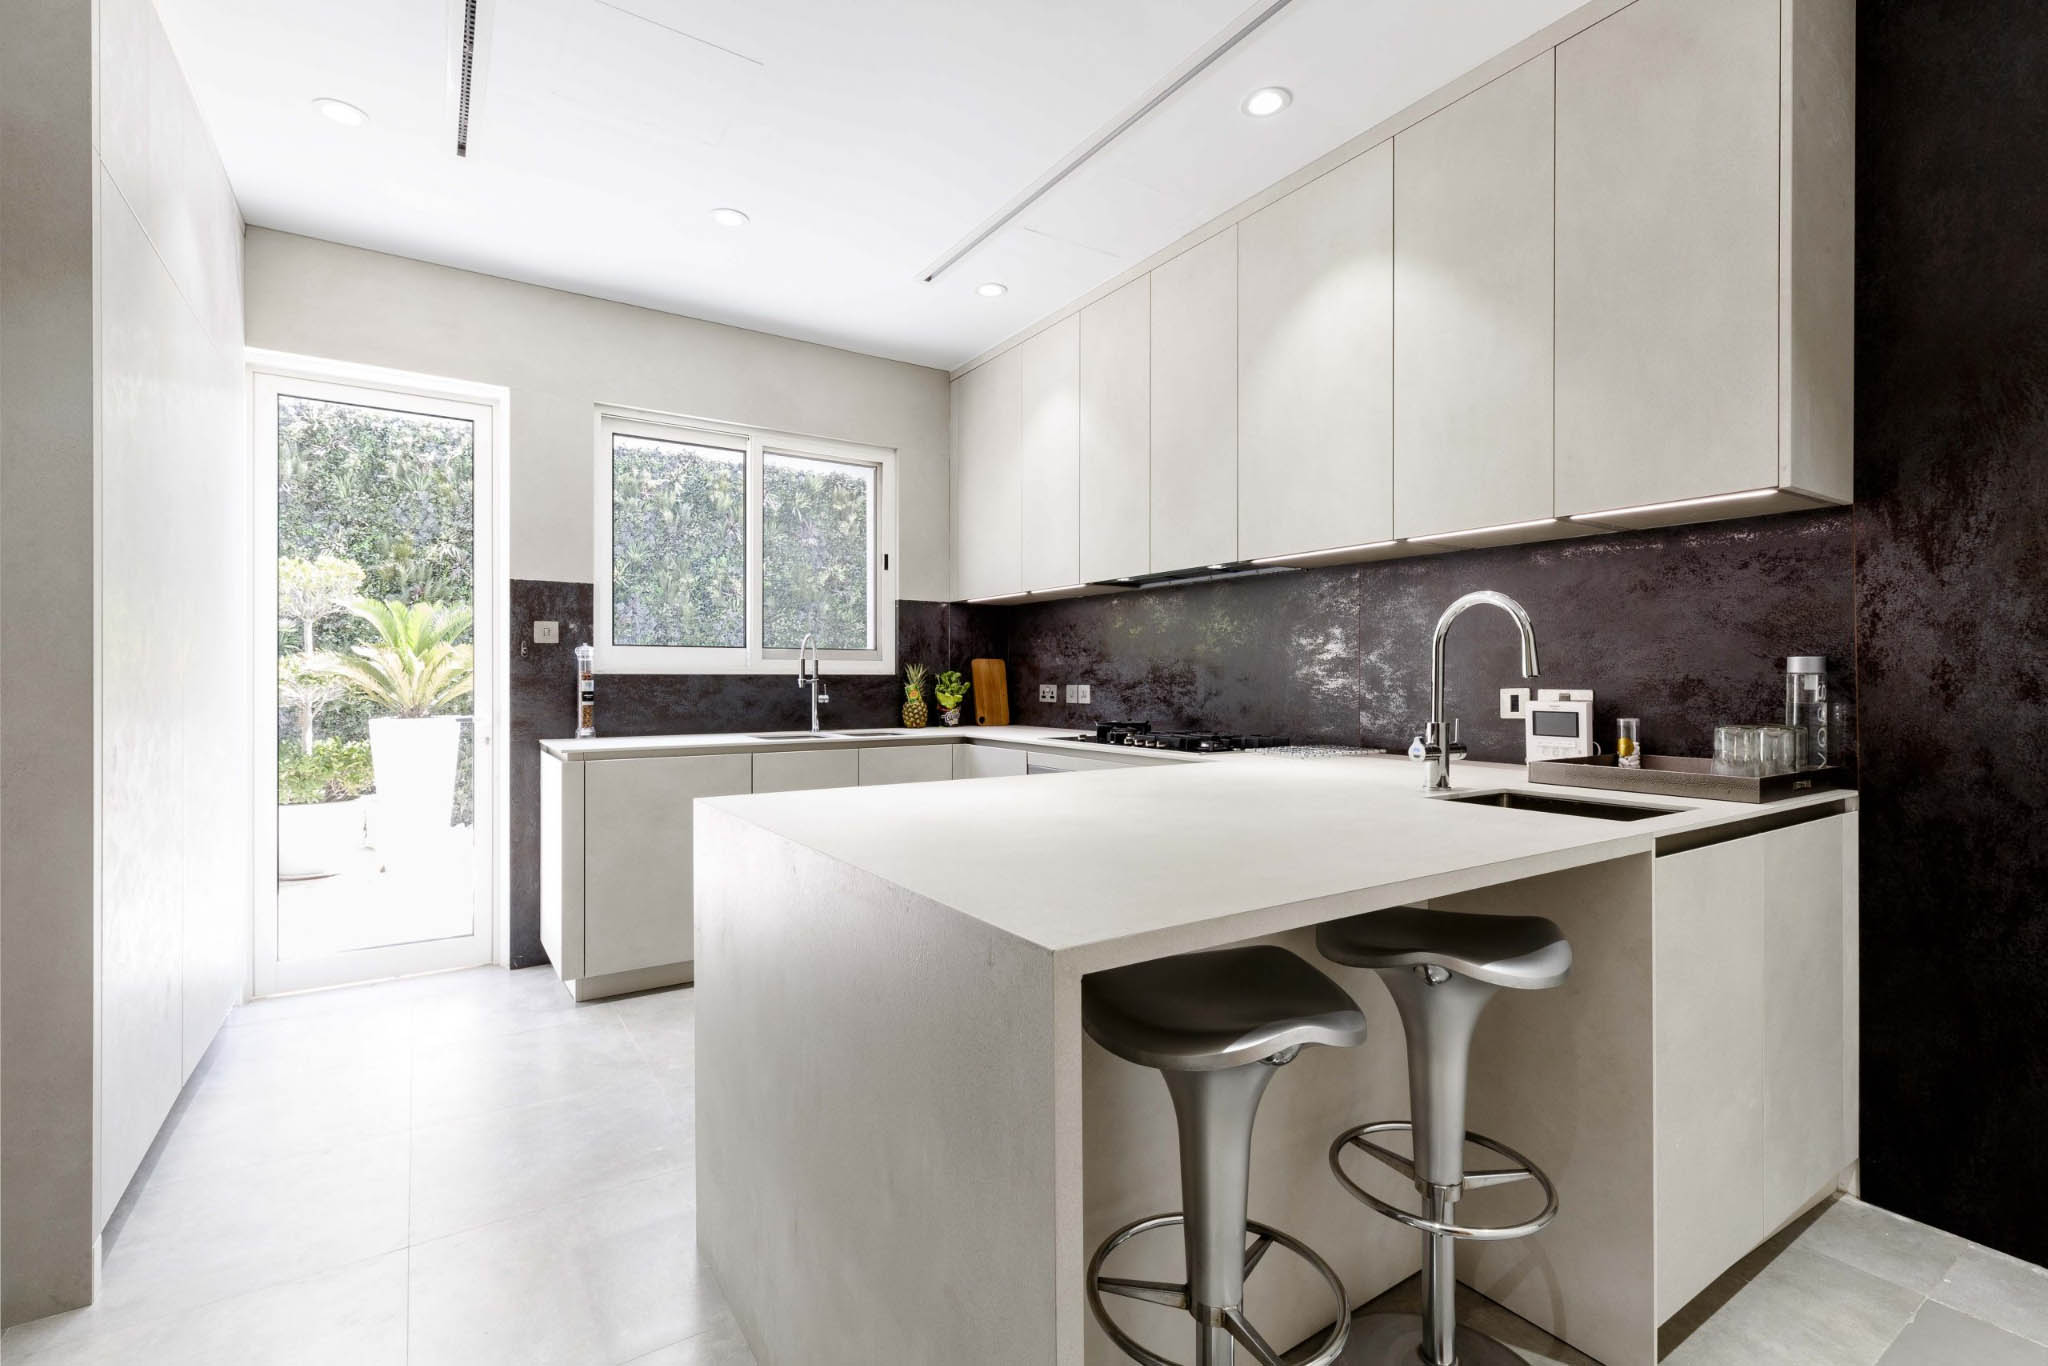 Improving Your Kitchen Designs With Sustainable Ideas